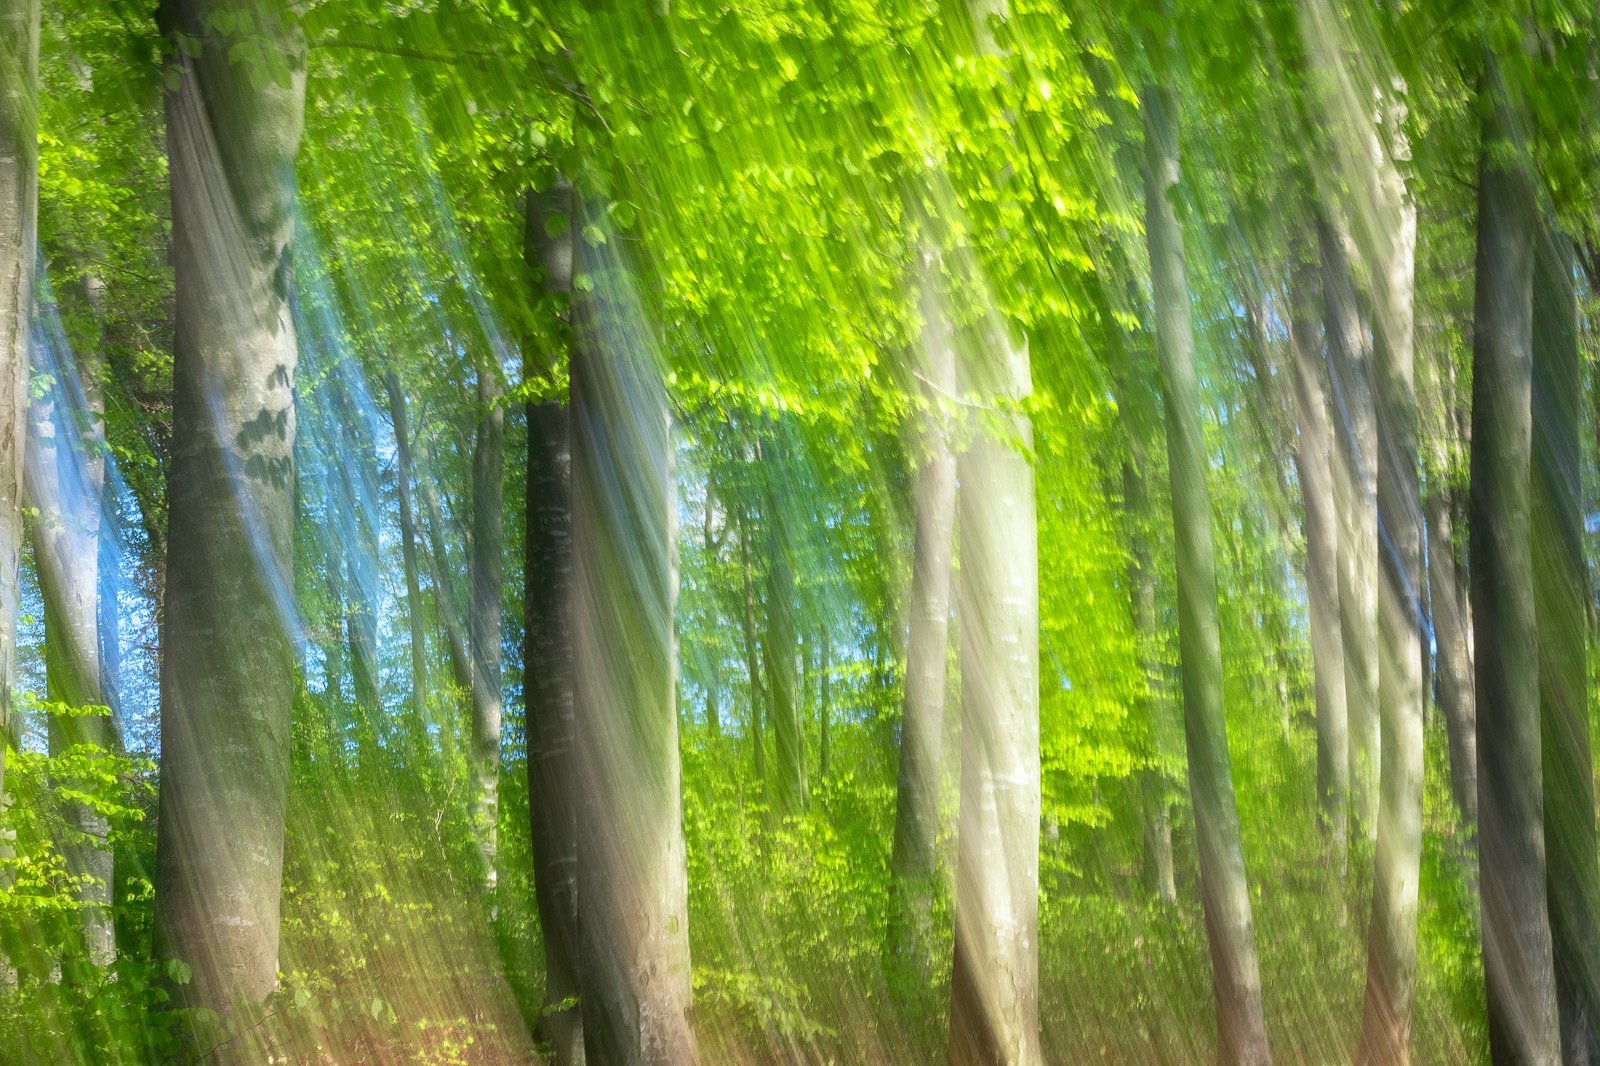 #nature #abstract #icem #forest #freshgreen #panning #silhouette , Gheorghe Popa